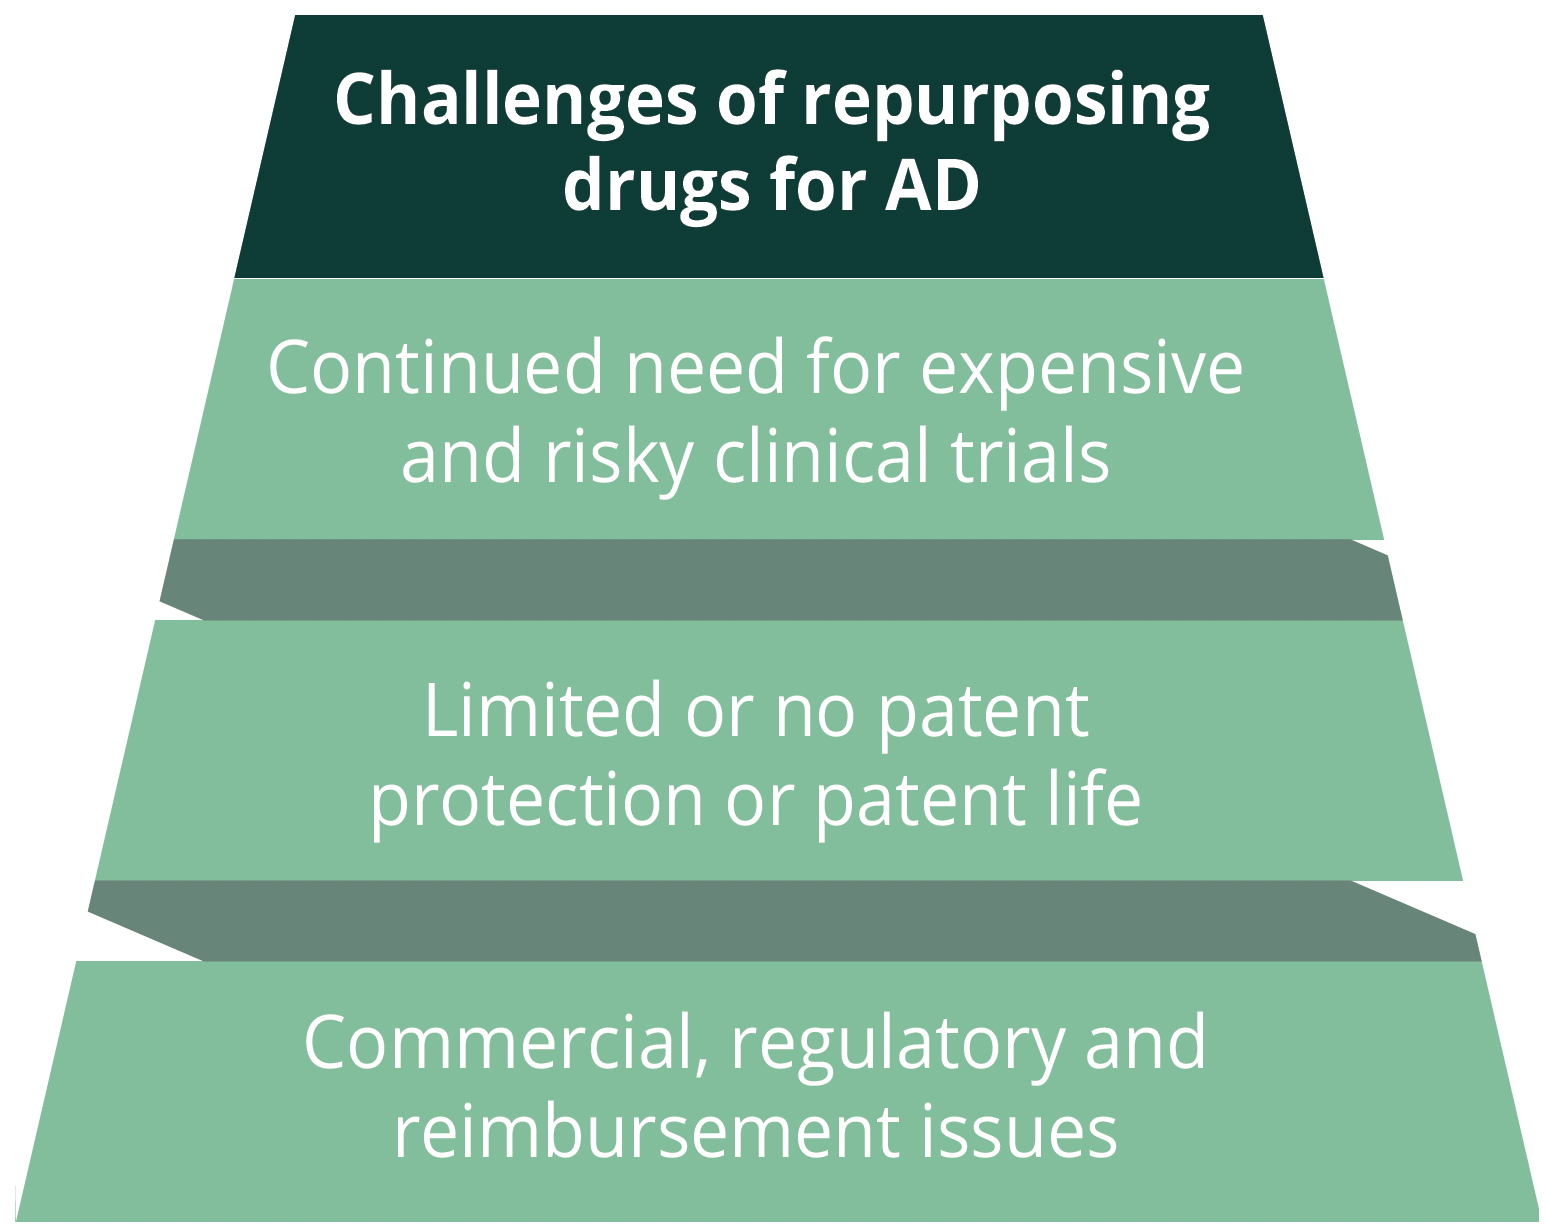 Challenges of repurposing drugs for the treatment of AD include the continued need for expensive and risky clinical trials, limited or no patent protection or patent life, and commercial, regulatory and reimbursement issues